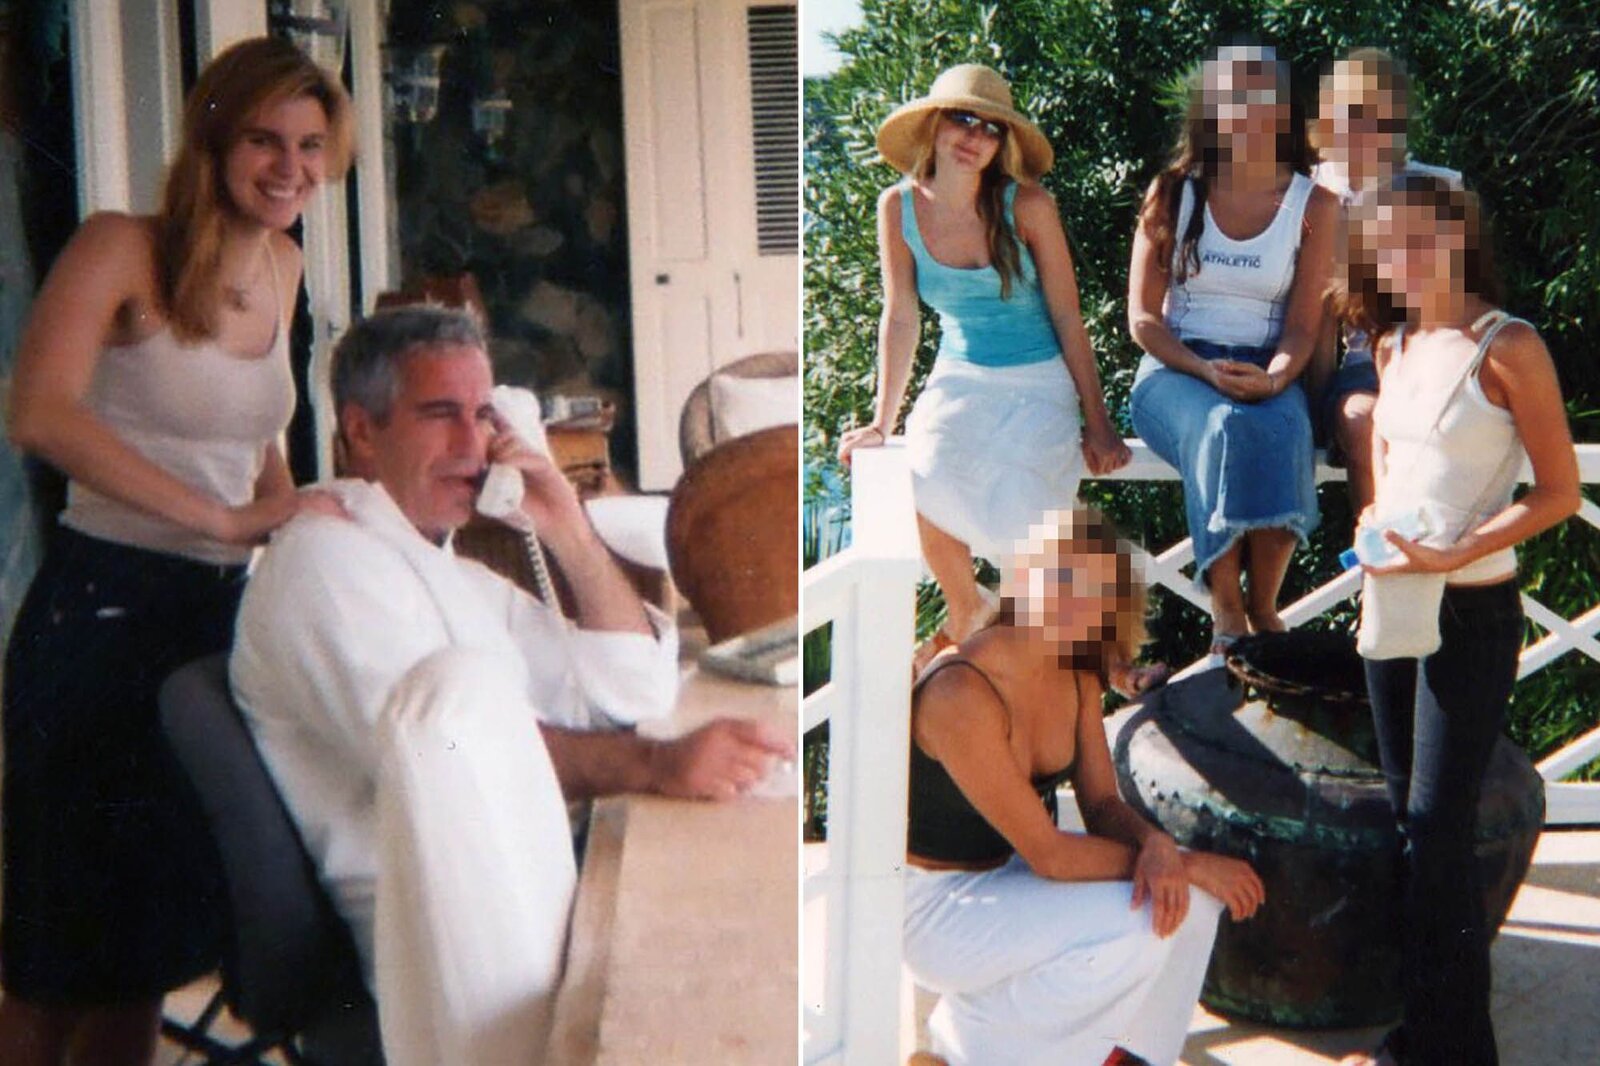 A man of mystery, many wonder exactly what went down on Little St. James. We're slowly learning about Jeffrey Epstein's activities on his island.